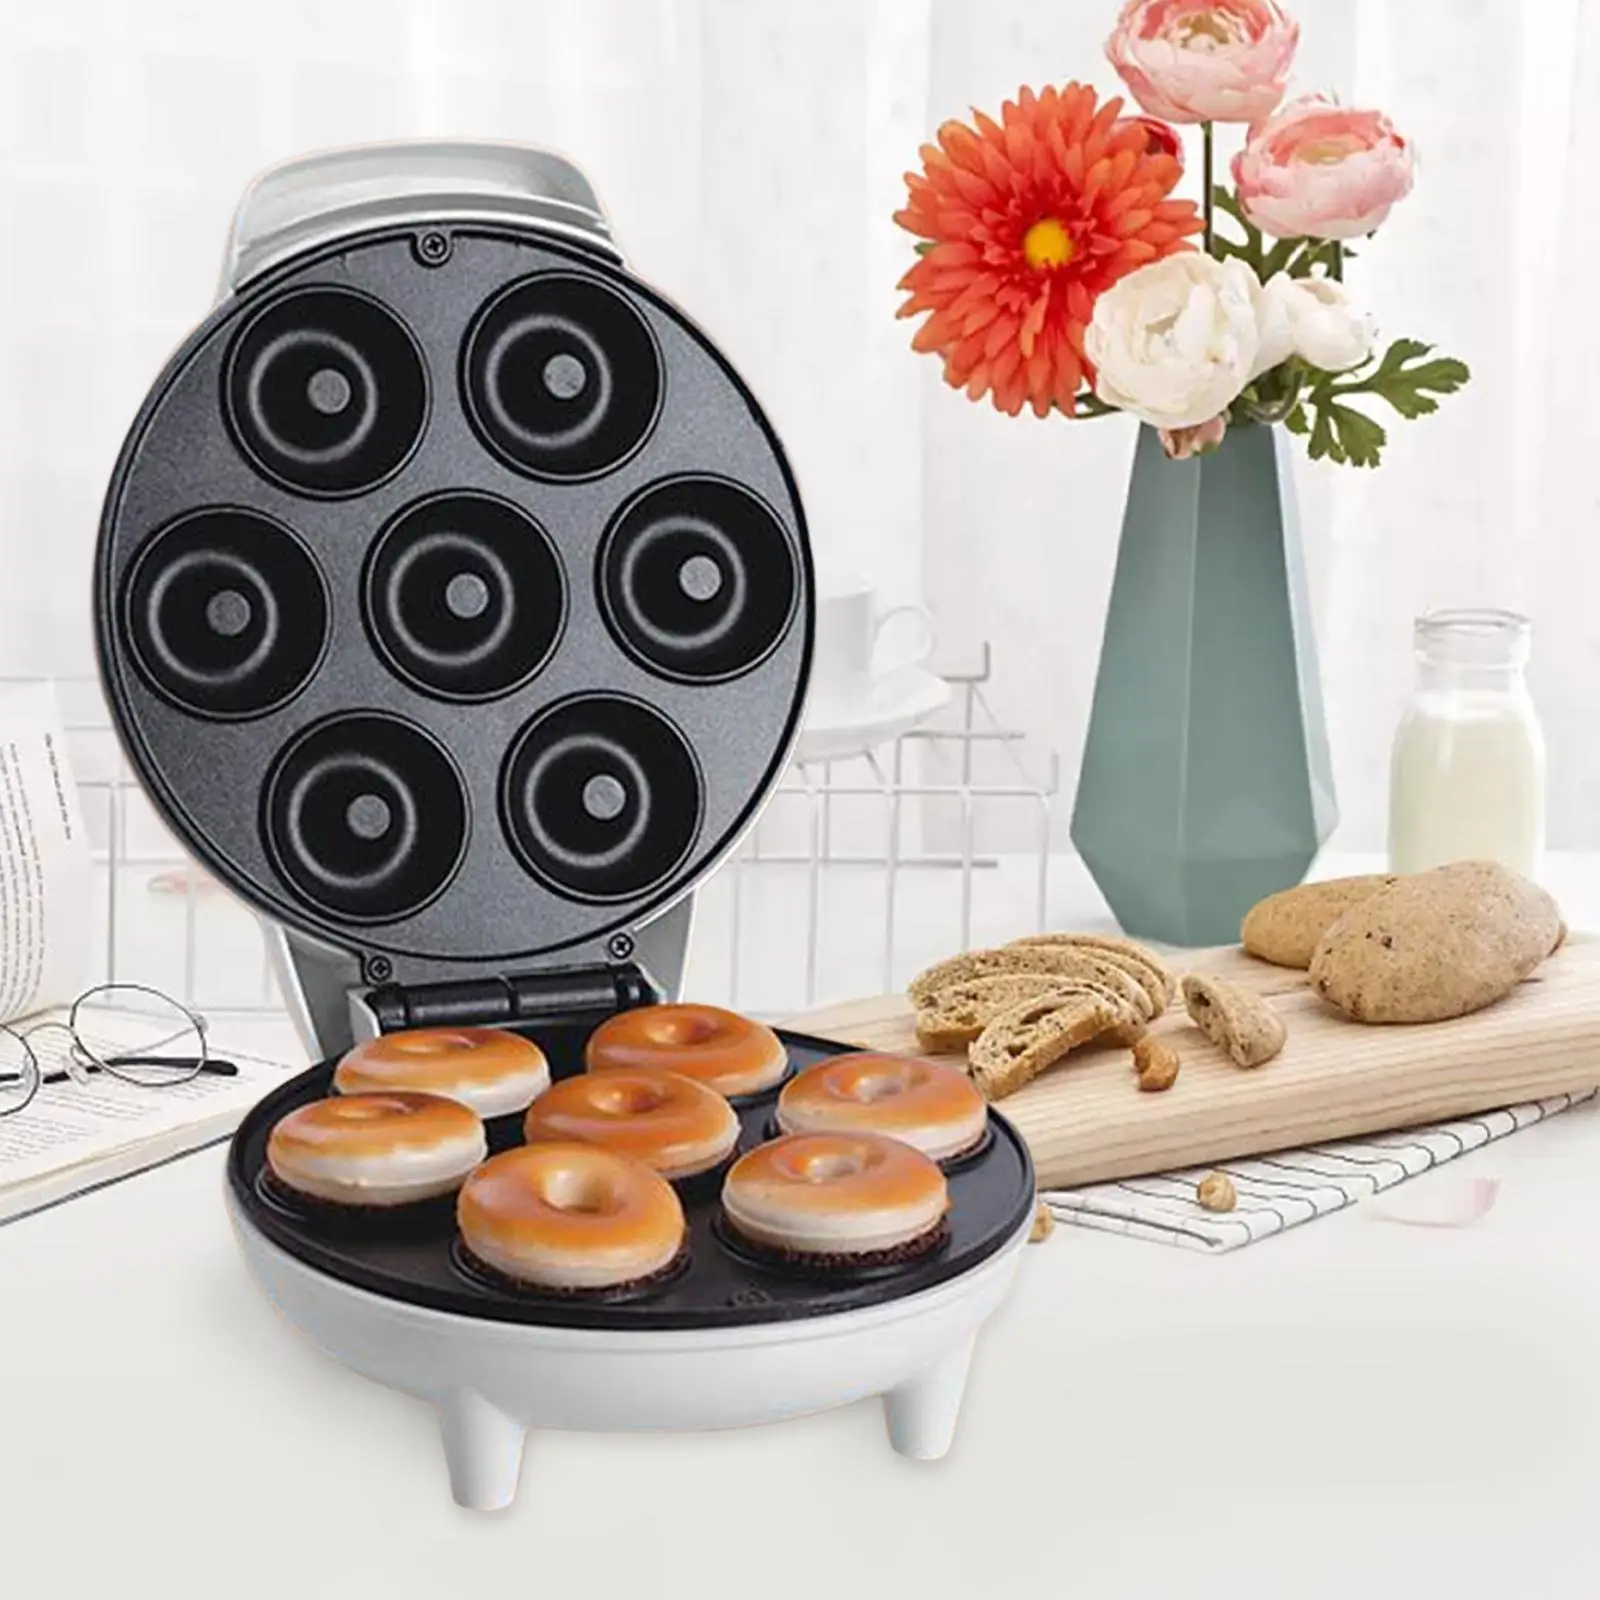 Donut Maker Easy to Clean Snack with Reminder Light Temperature Control Desserts Makes 7 Doughnuts Waffle Machine for Home